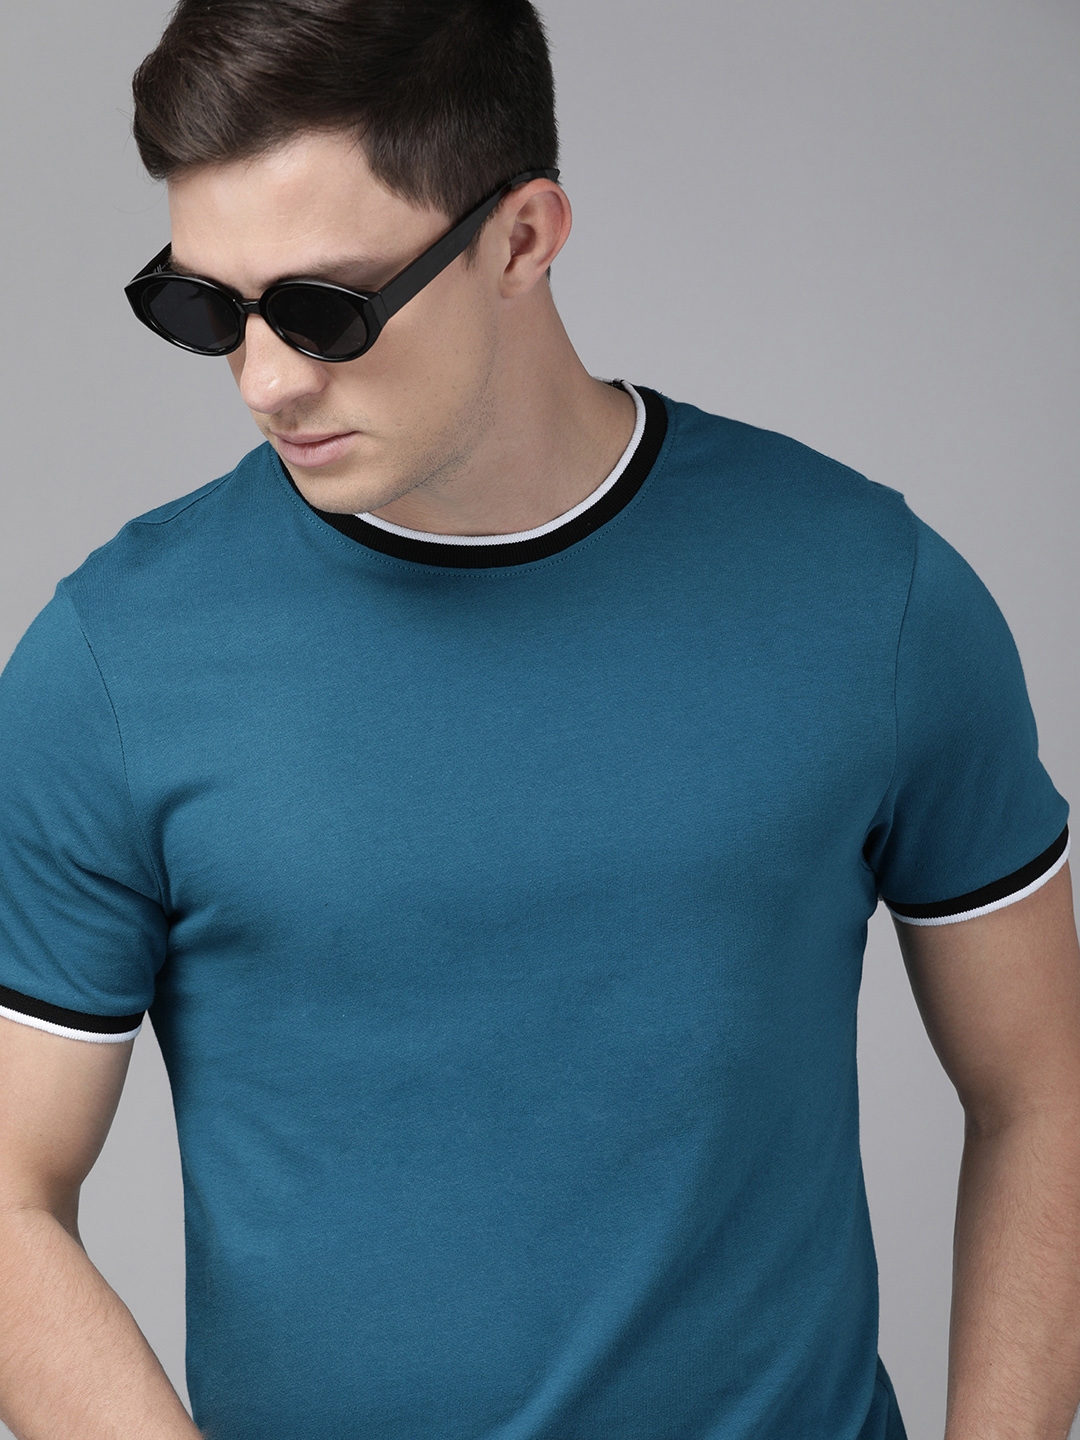 Buy Roadster Men Teal Solid Round Neck Pure Cotton T Shirt - Tshirts ...